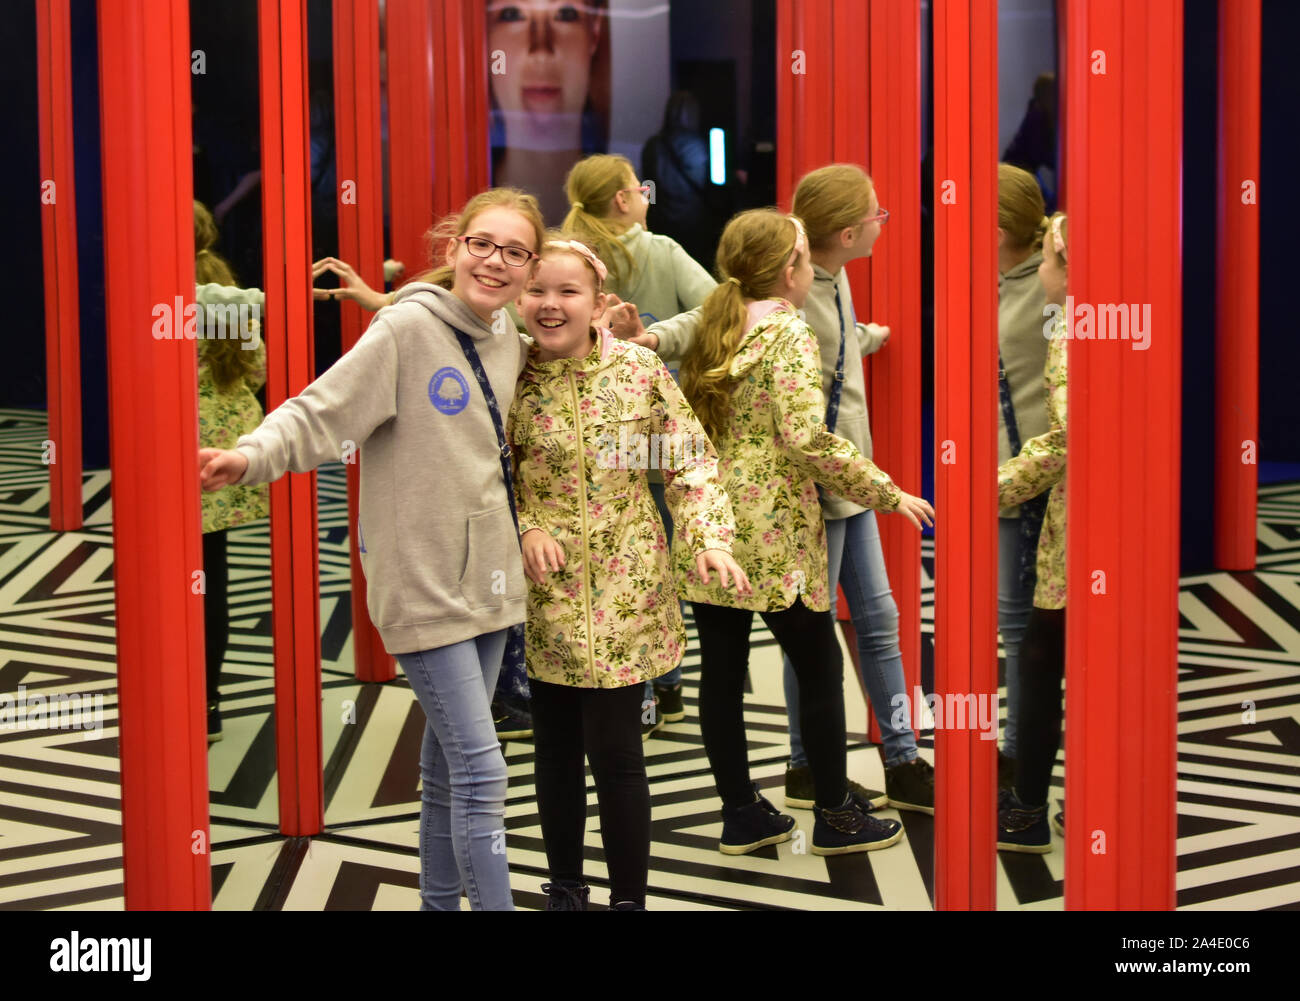 Two girls in a mirror maze. Stock Photo